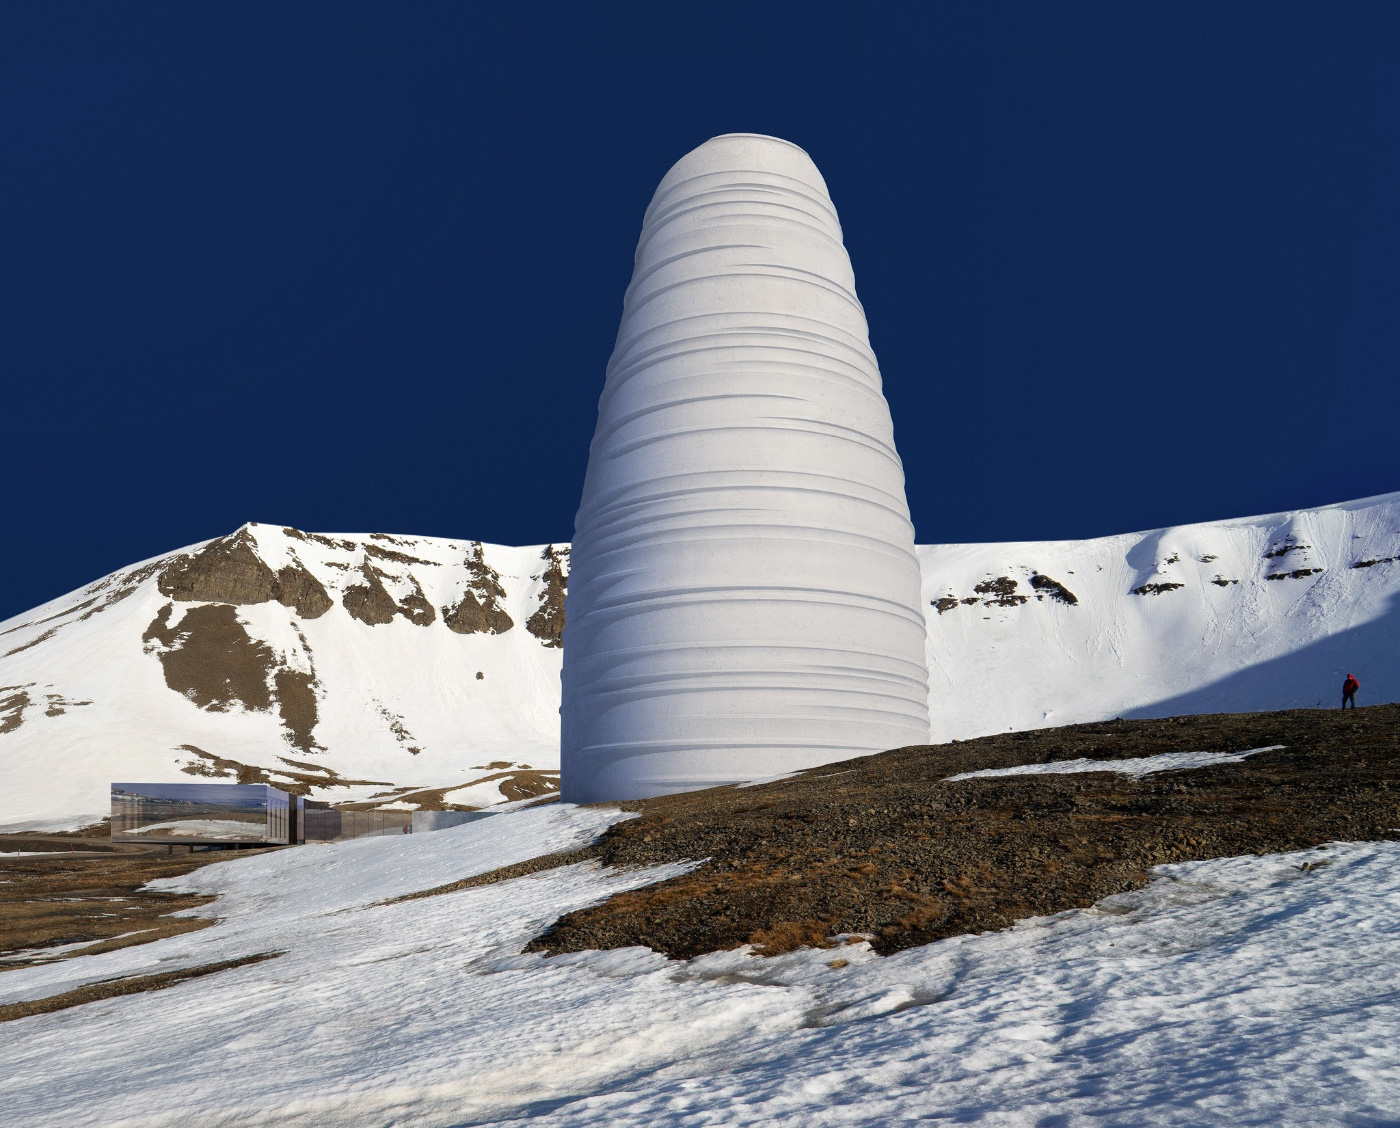 Rendering of a white tower in the snow among the Svalbard Global Seed Vault